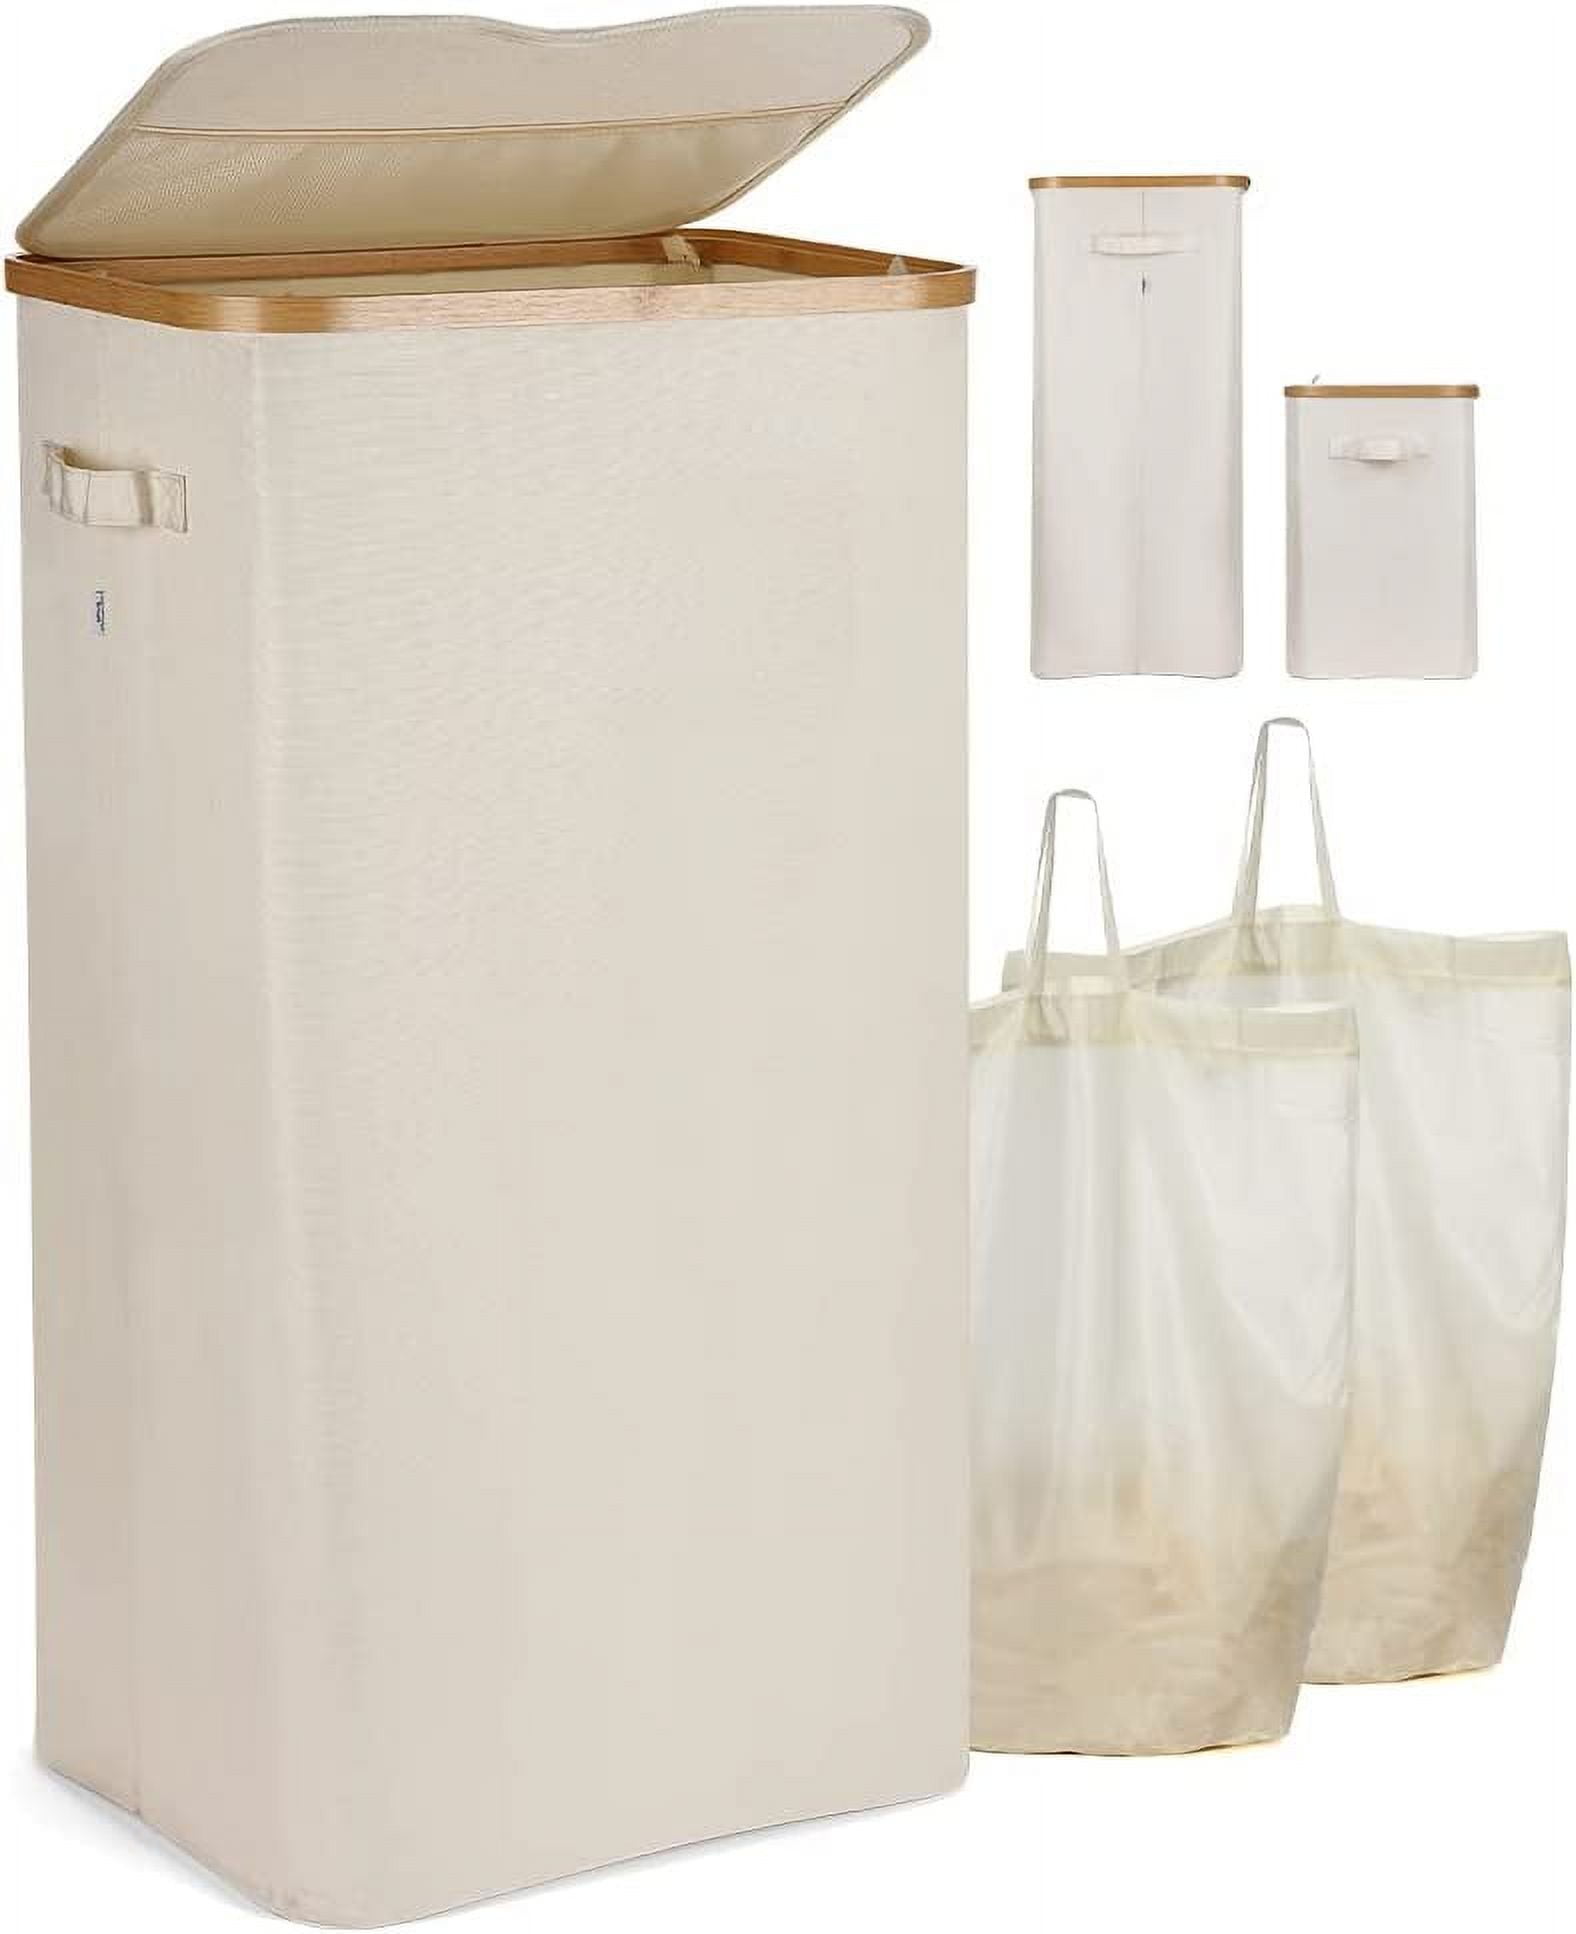 JOYTUTUS 100Litre Laundry Hamper with Lid,Oxford Cloth Foldable with ...